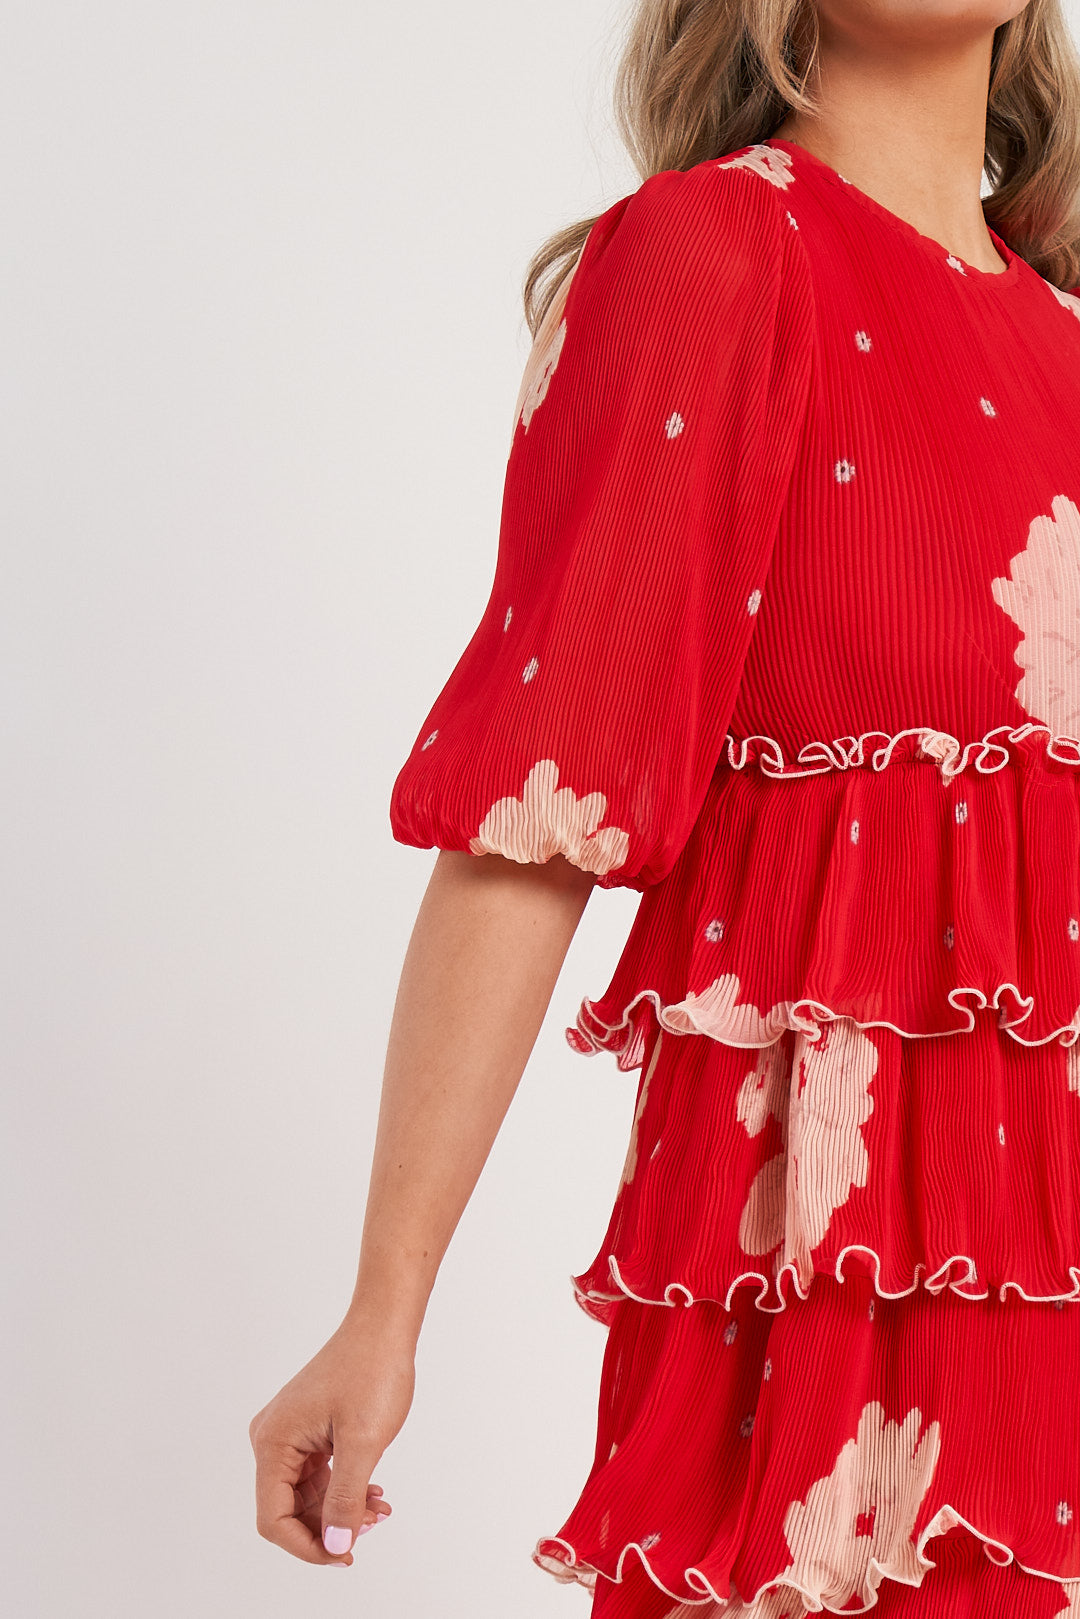 Ganni Red Floral Tiered Midi